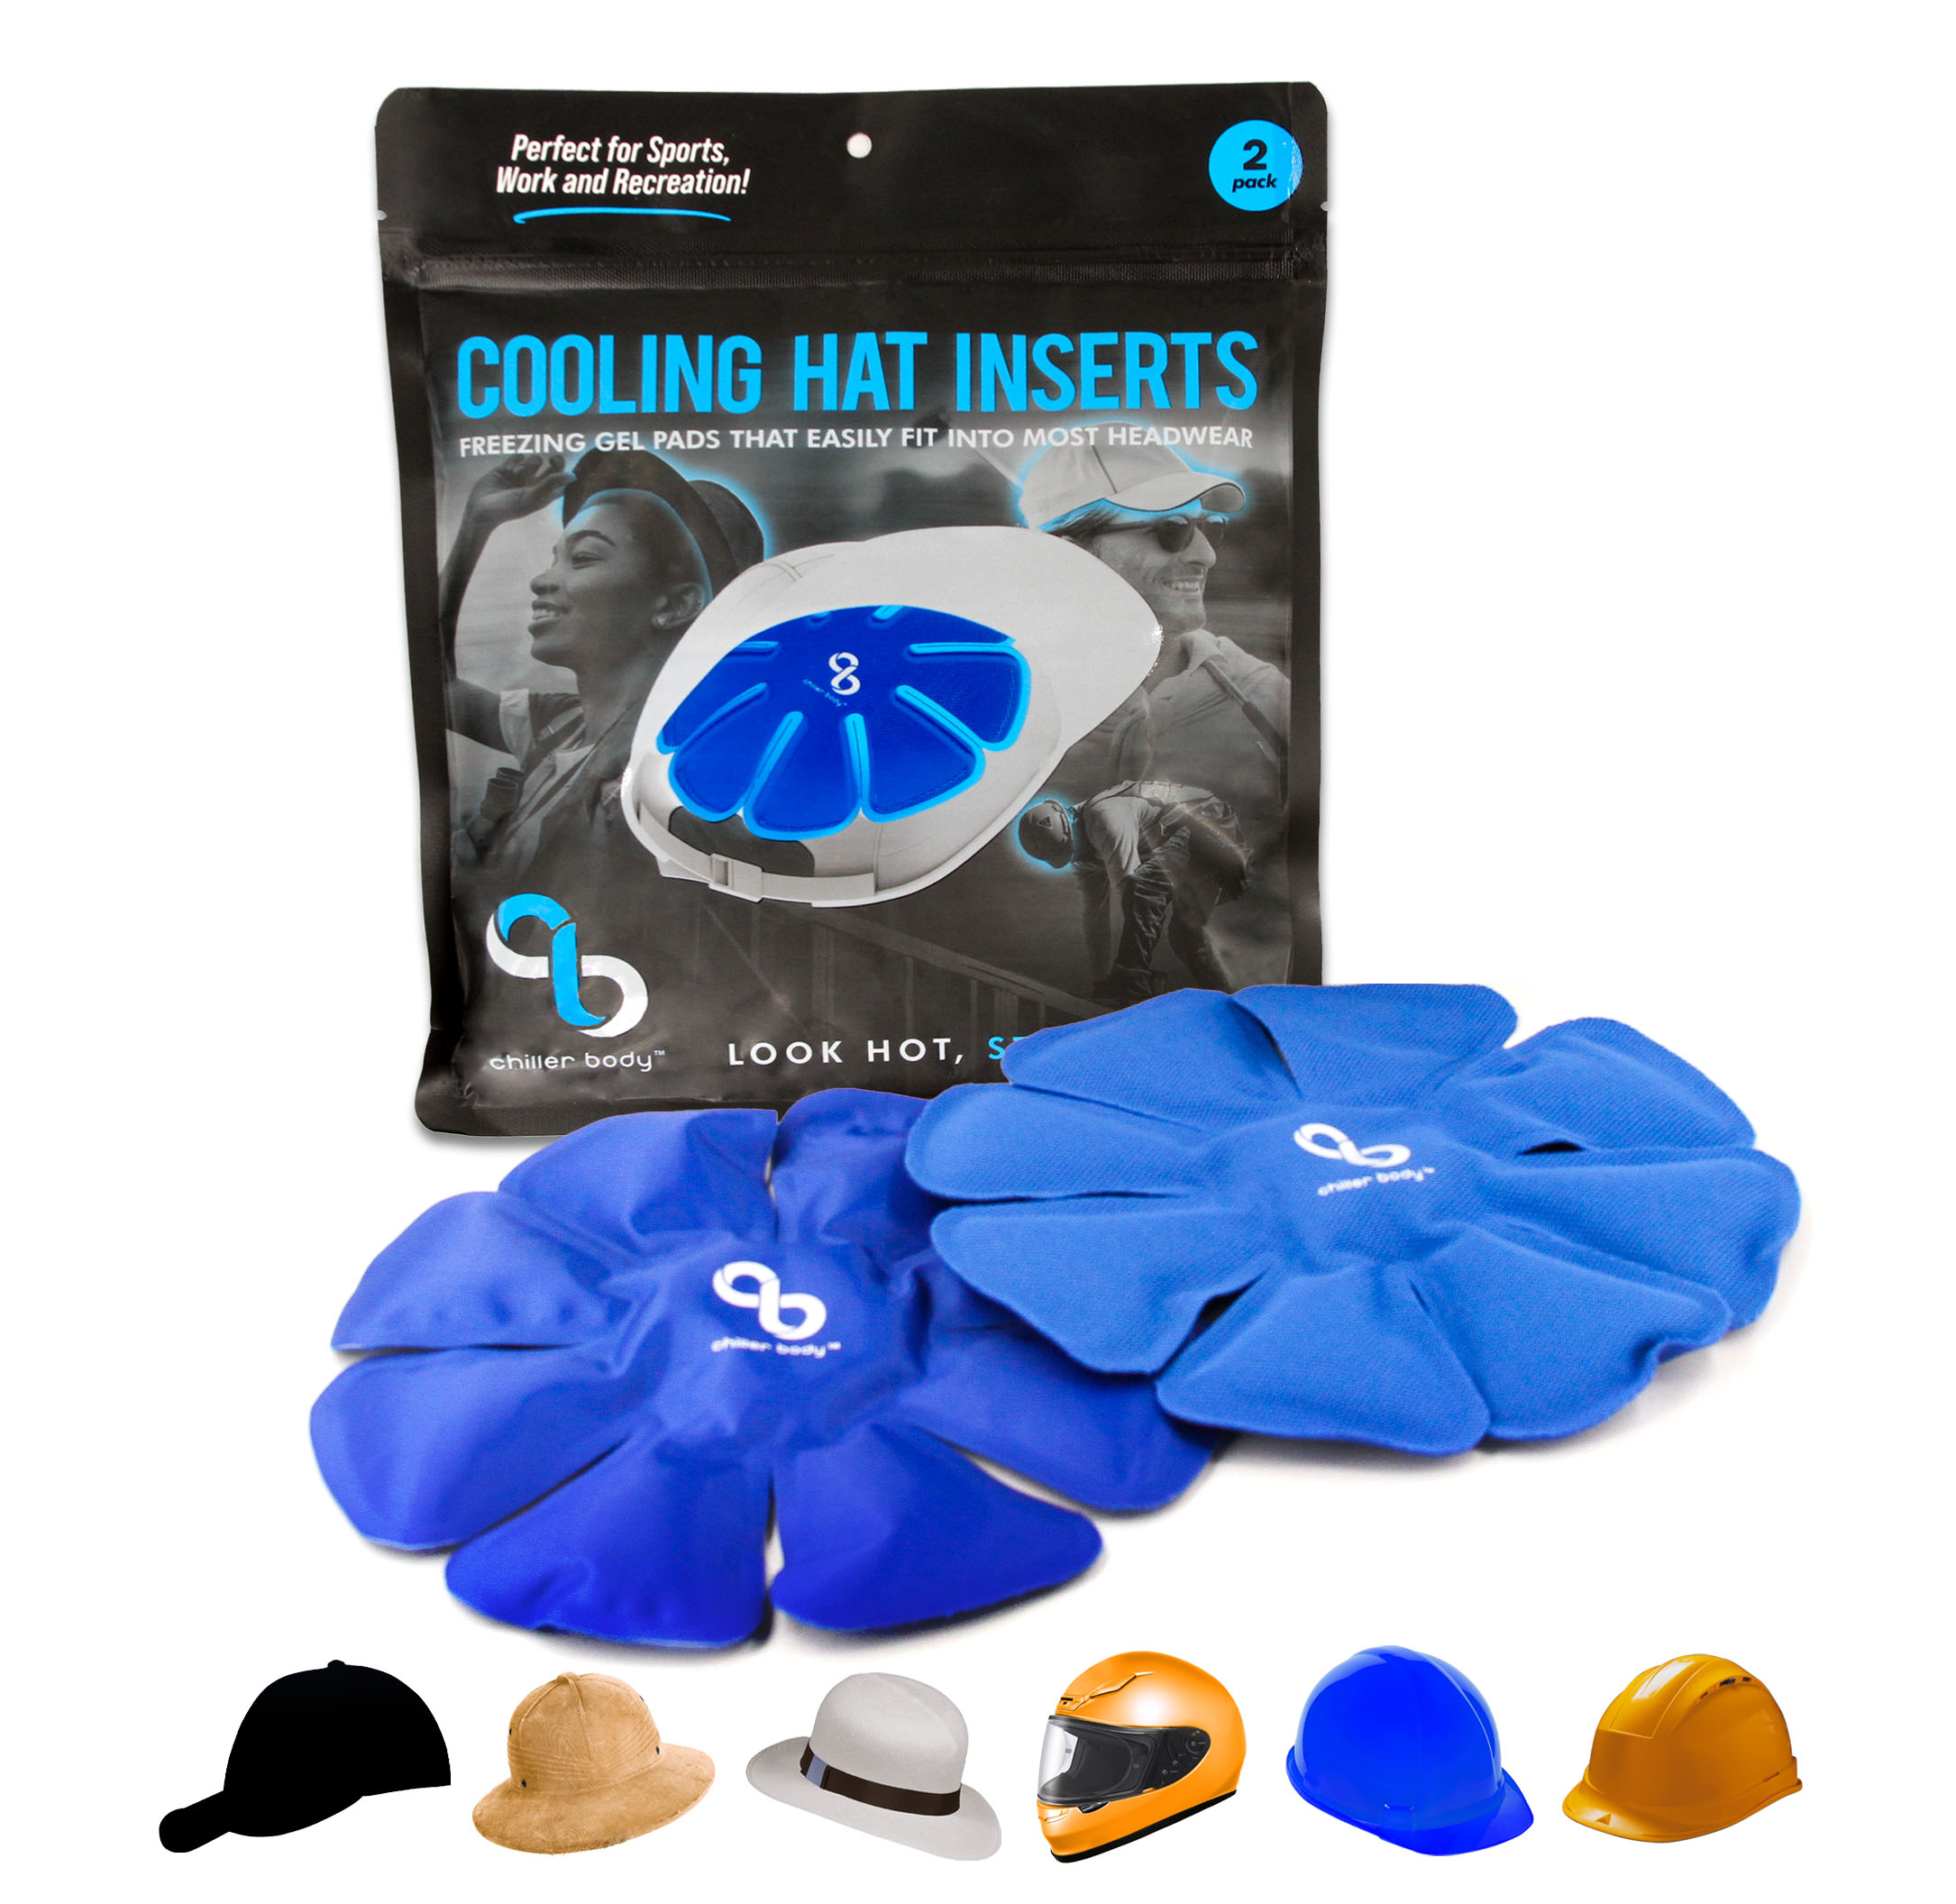 Cooling Hat Insert for Sports and Work